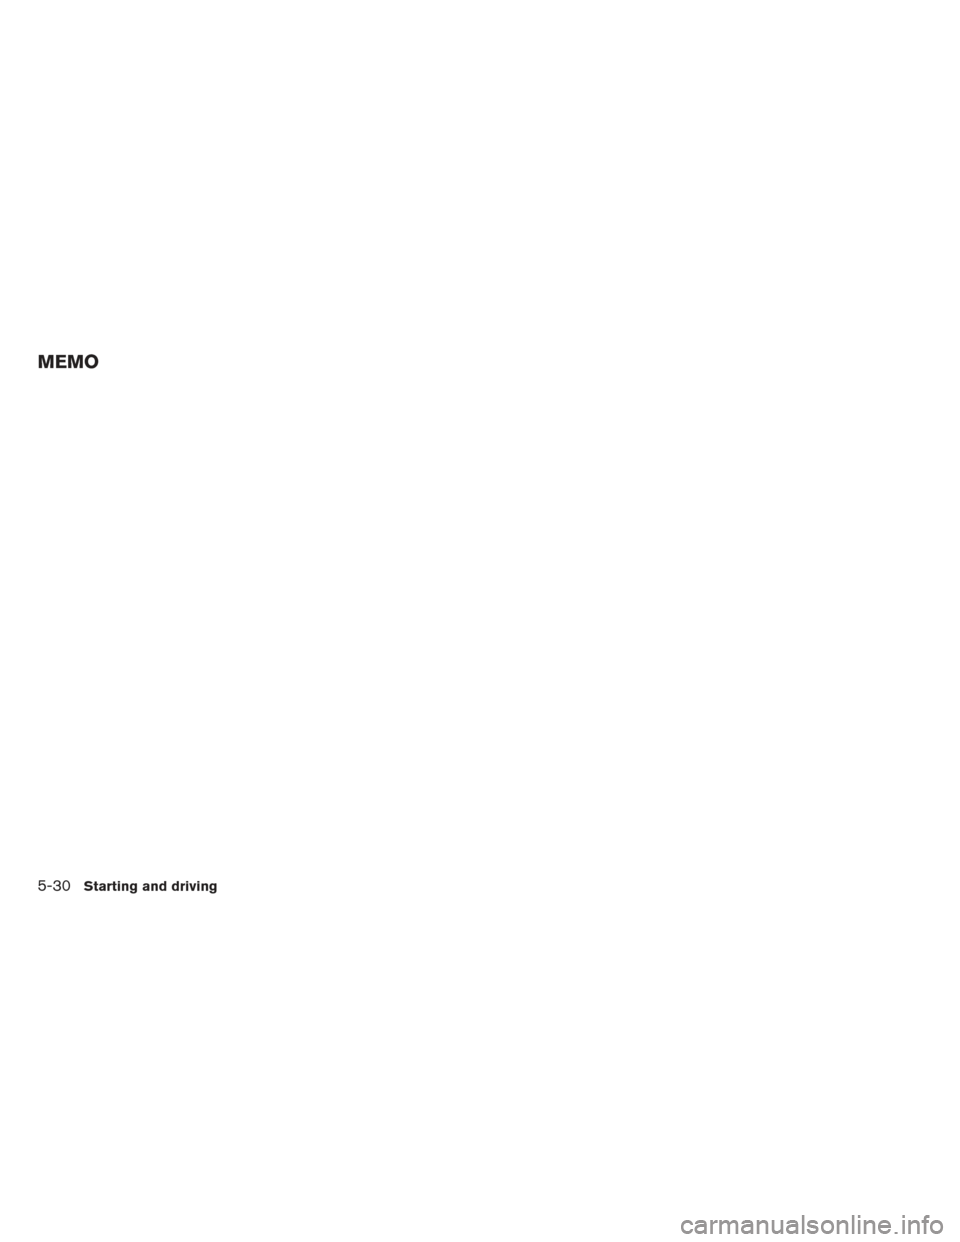 NISSAN ALTIMA COUPE 2012 D32 / 4.G Owners Manual MEMO
5-30Starting and driving 